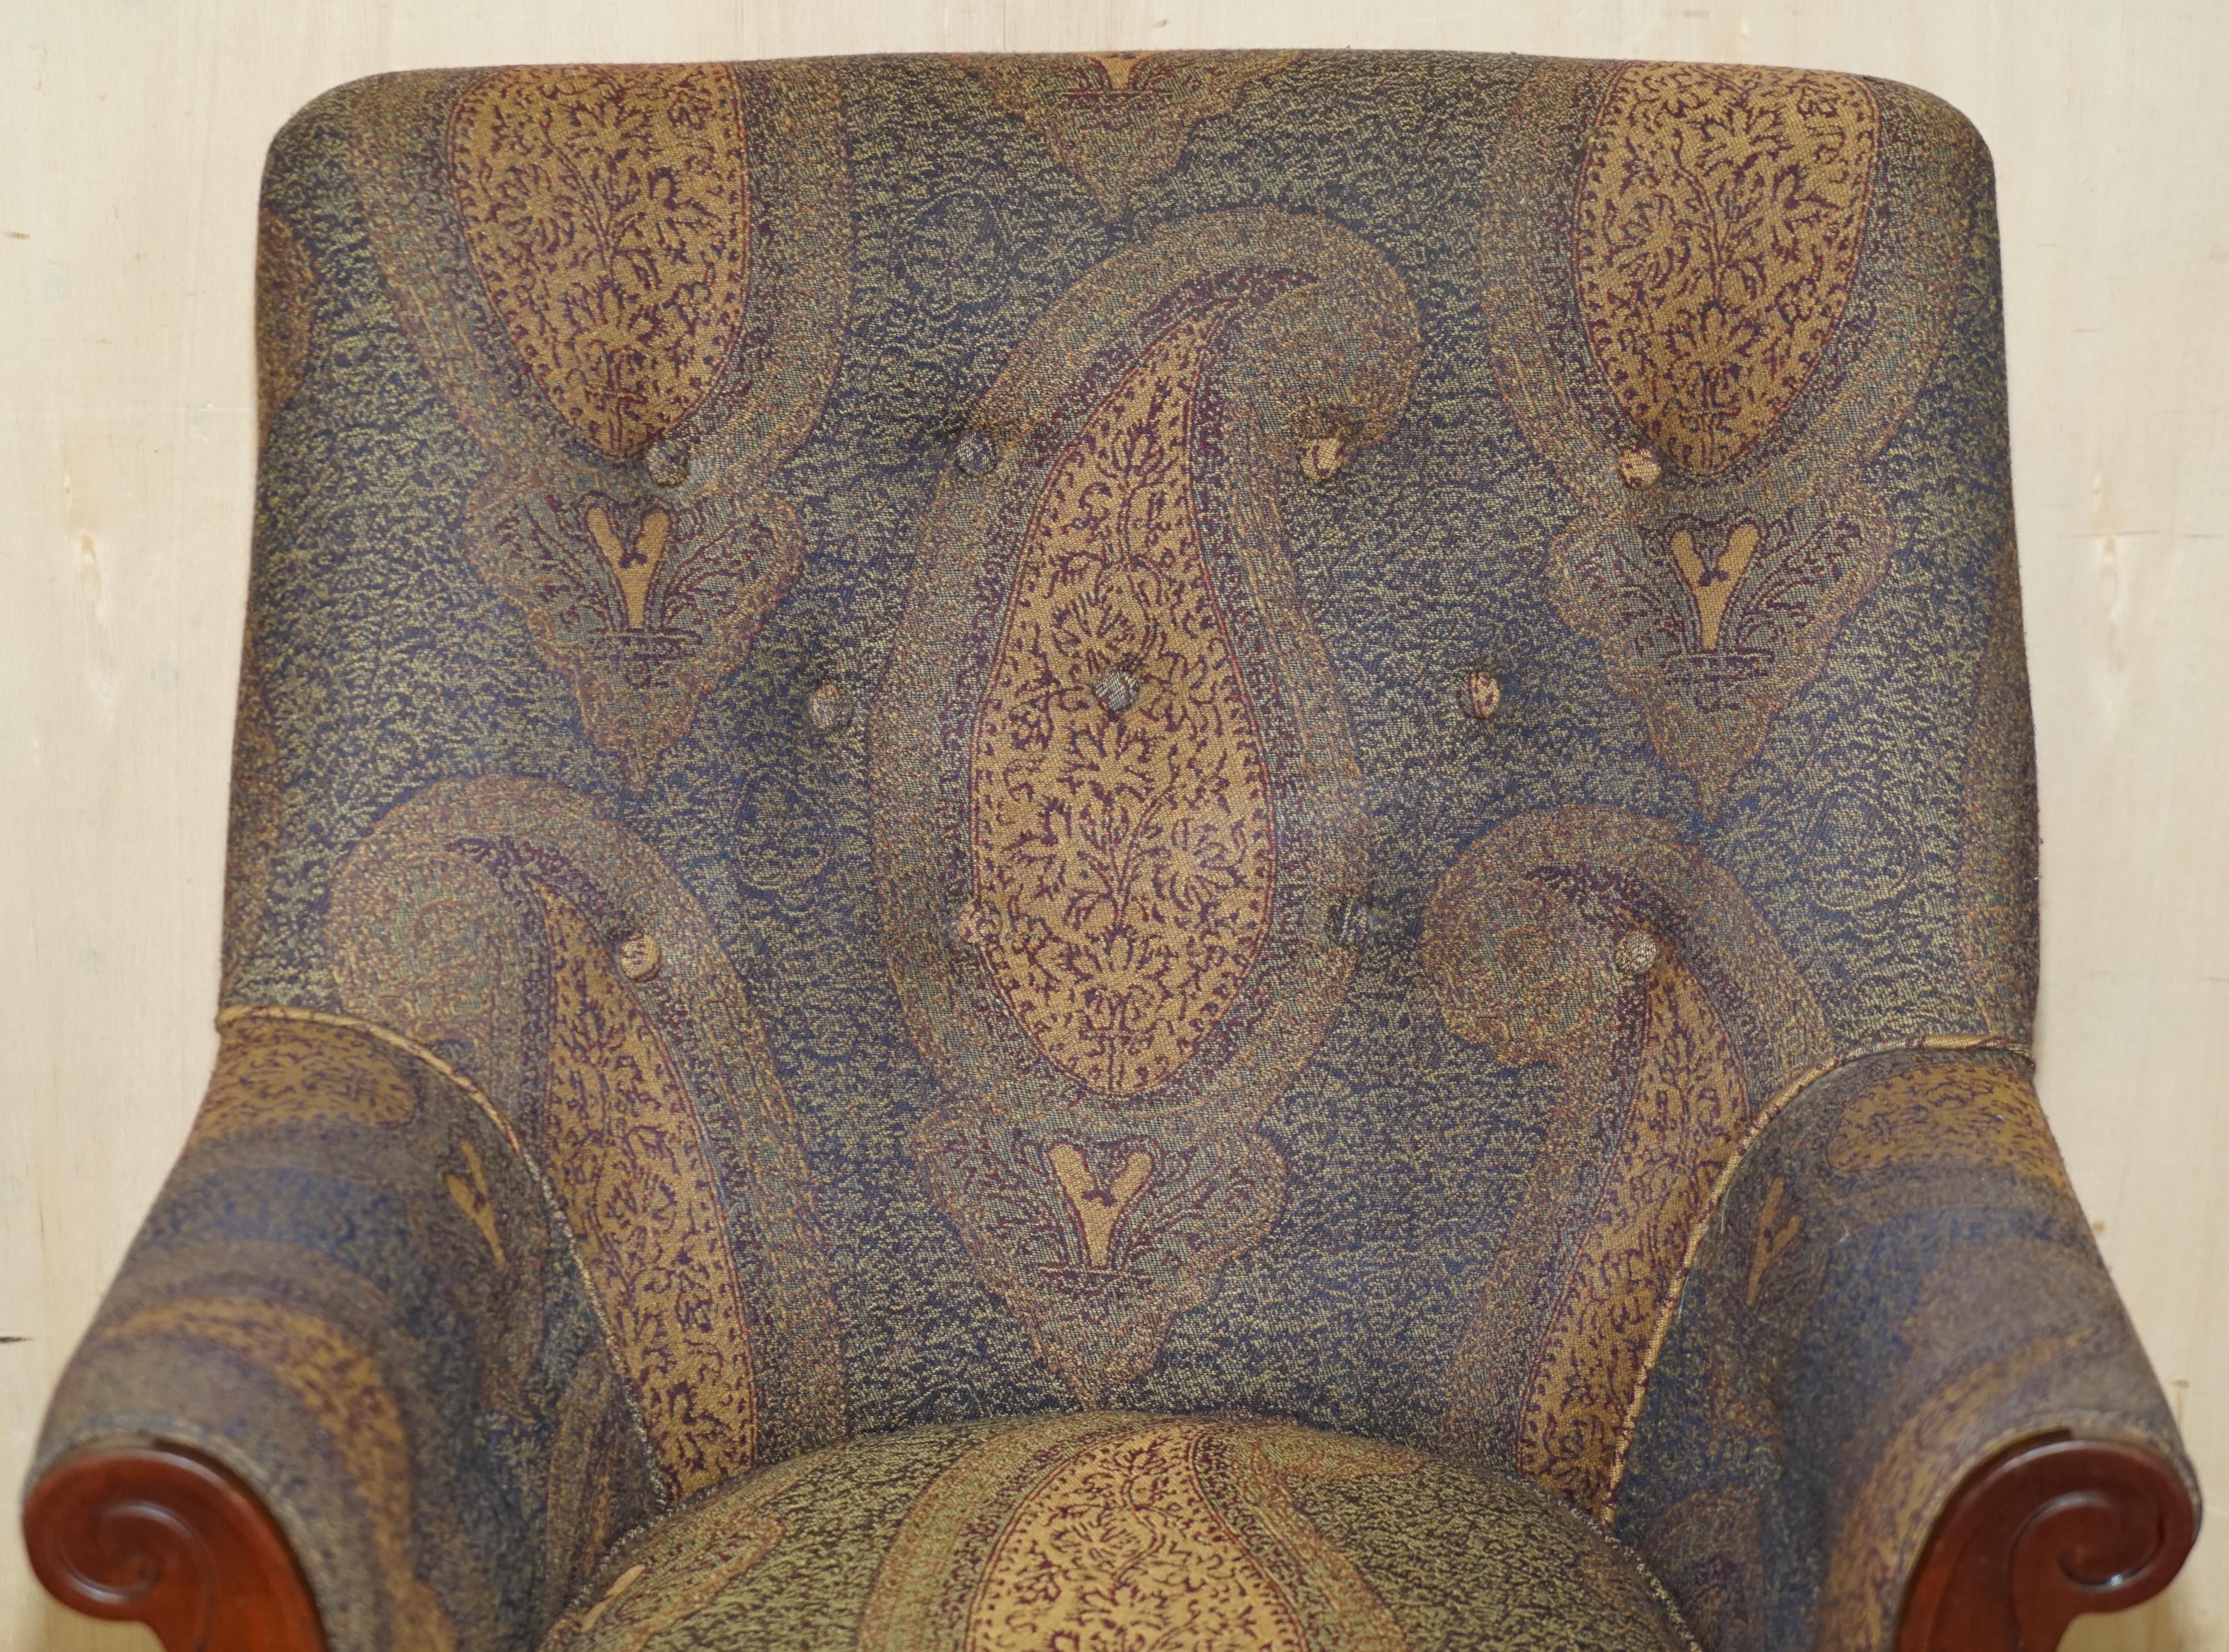 William IV PAiR OF GEORGE SMITH WILLIAM IV LIBRARY ARMCHAIRS UNIQUE UPHOLSTERY For Sale